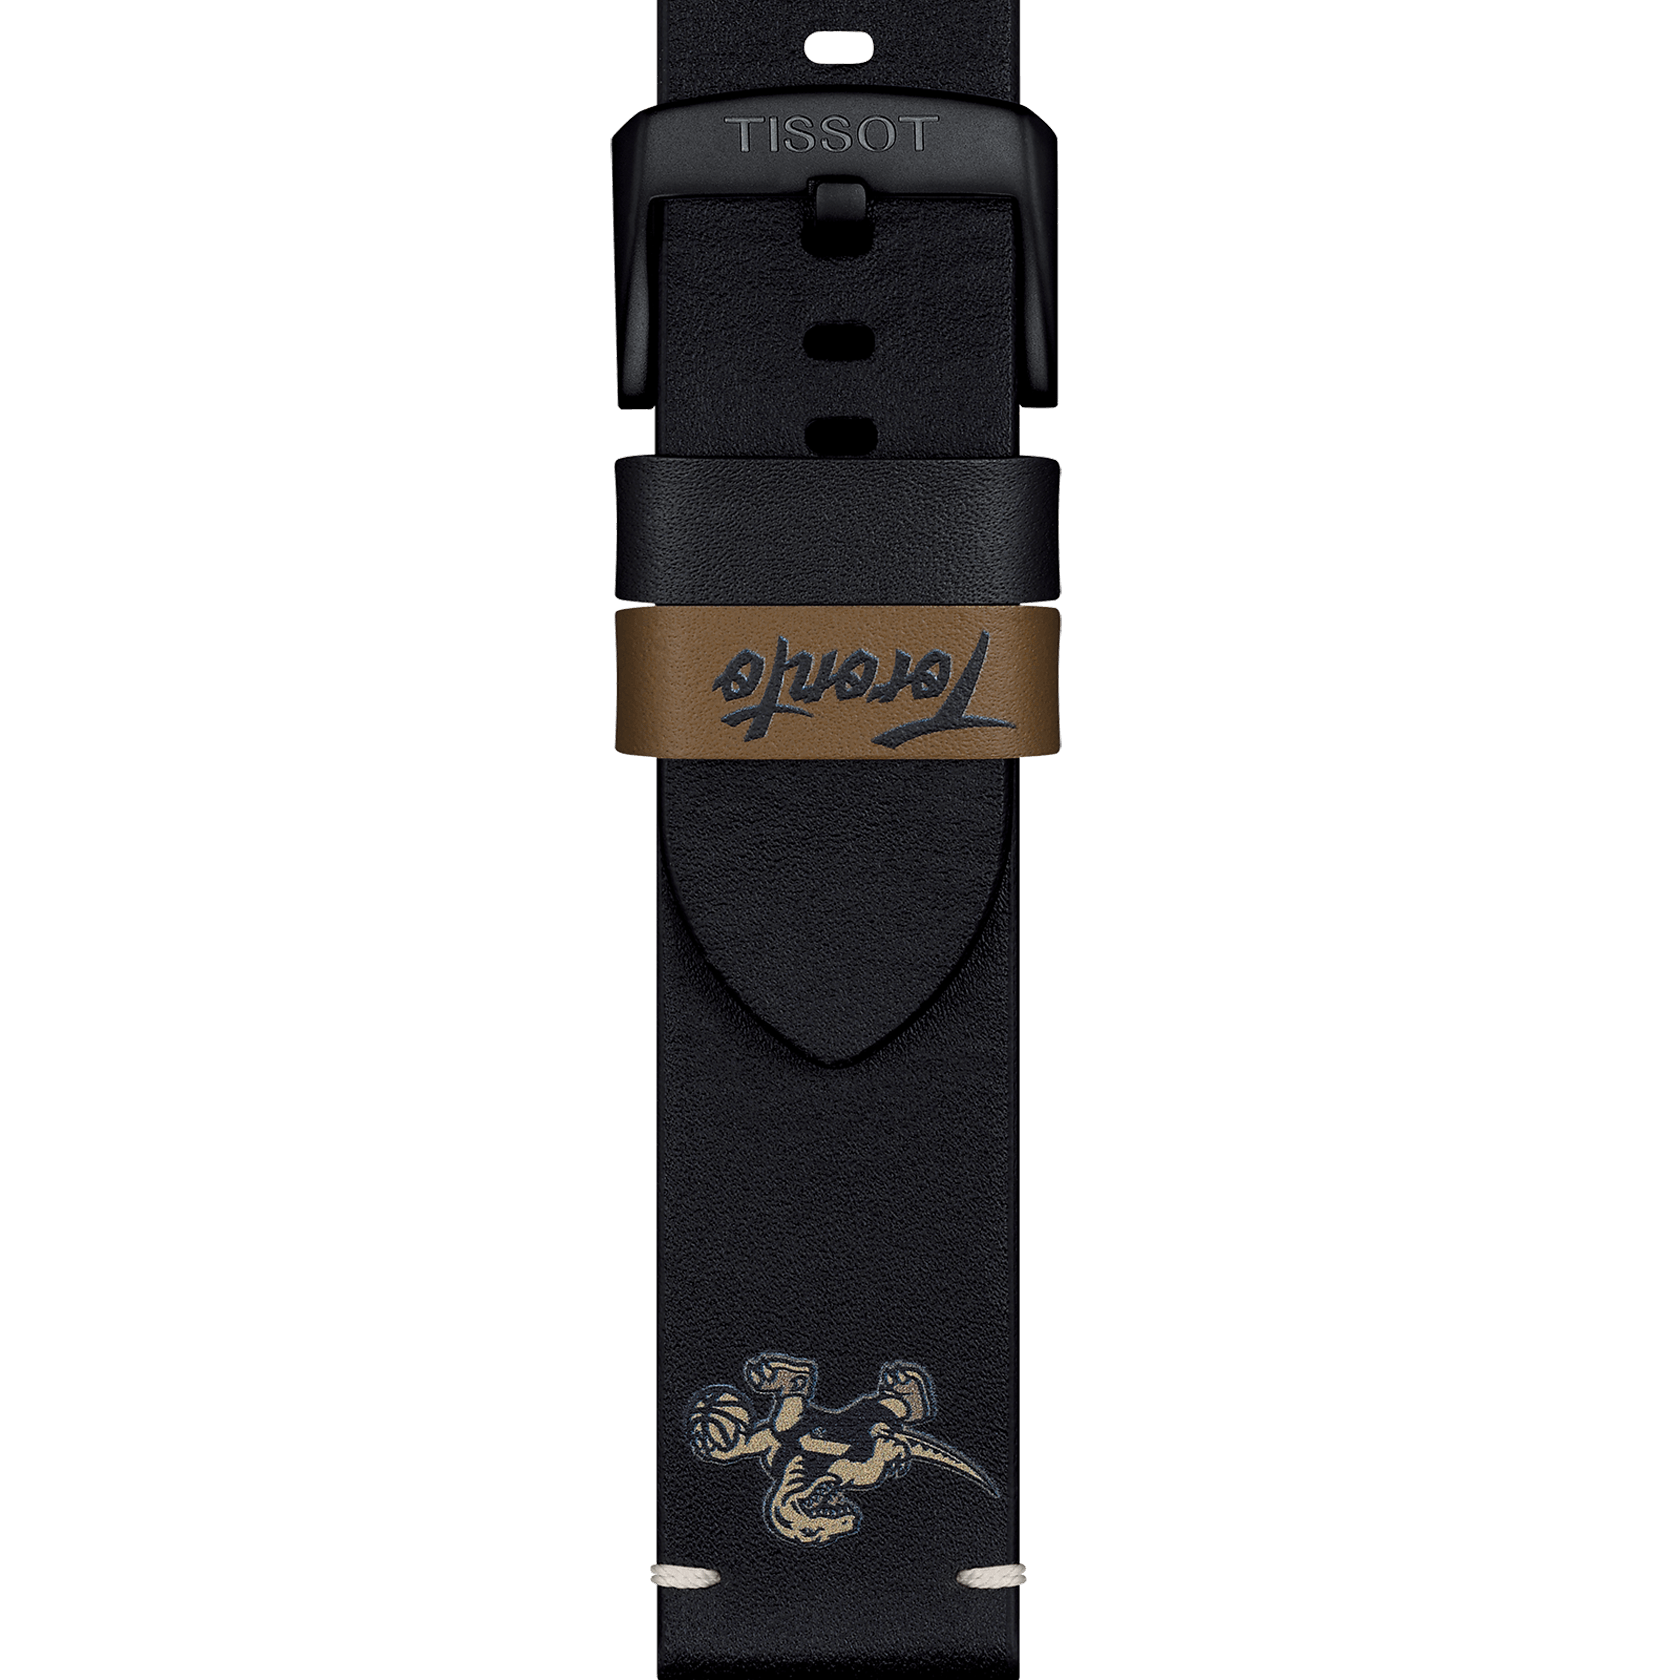 Tissot Official NBA leather strap Toronto Raptors Limited Edition 22mm